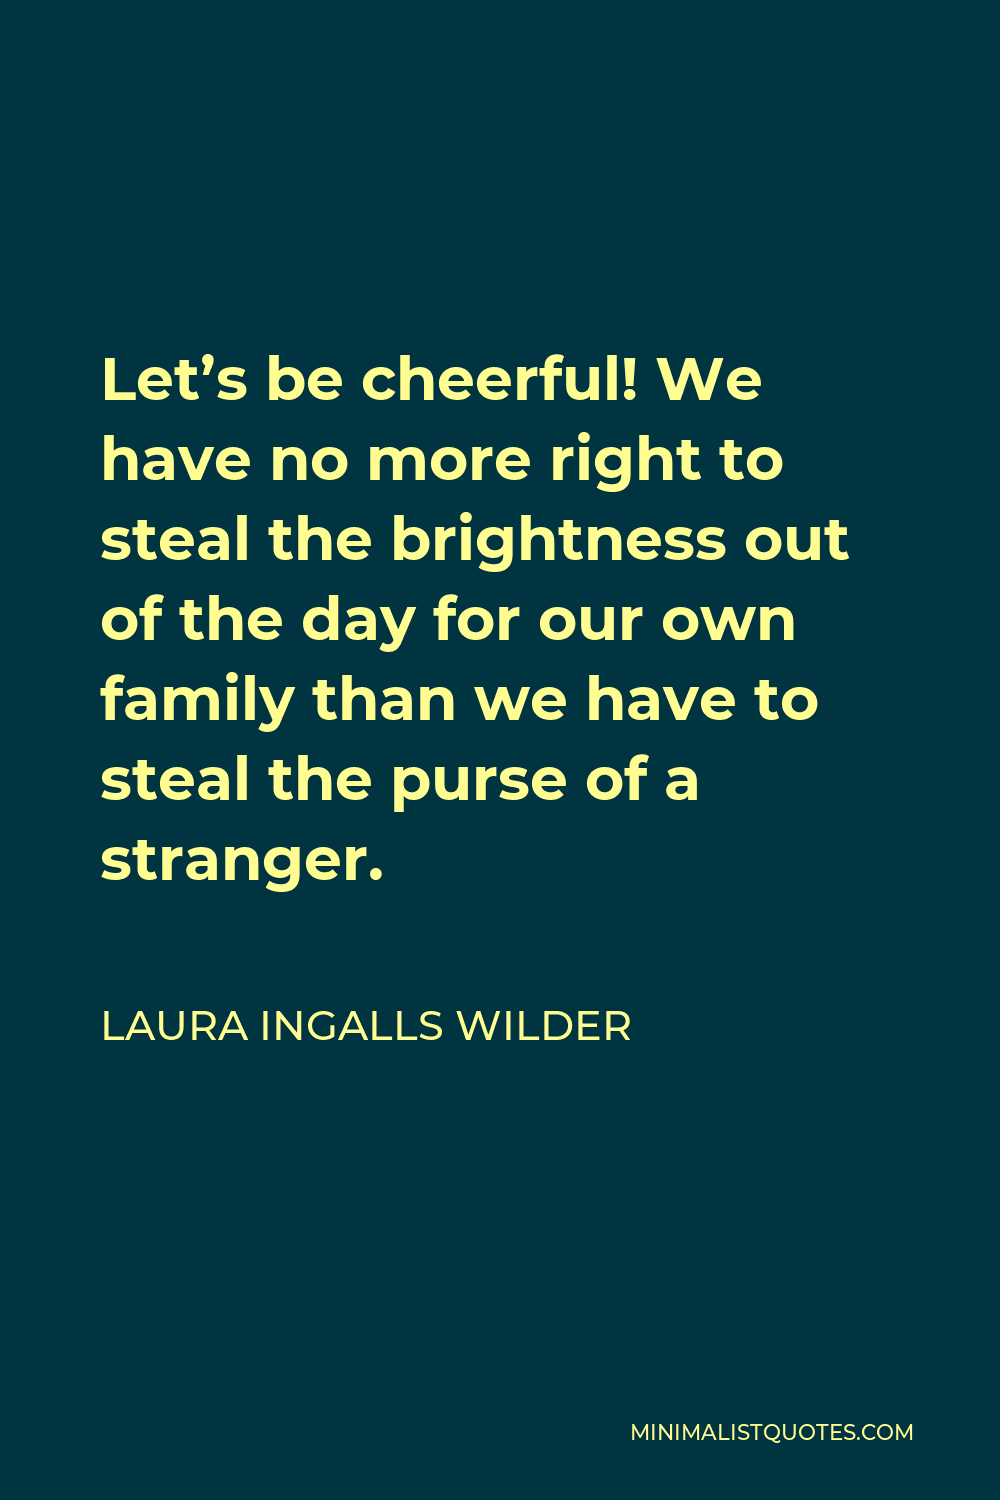 Laura Ingalls Wilder Quote - Let’s be cheerful! We have no more right to steal the brightness out of the day for our own family than we have to steal the purse of a stranger.